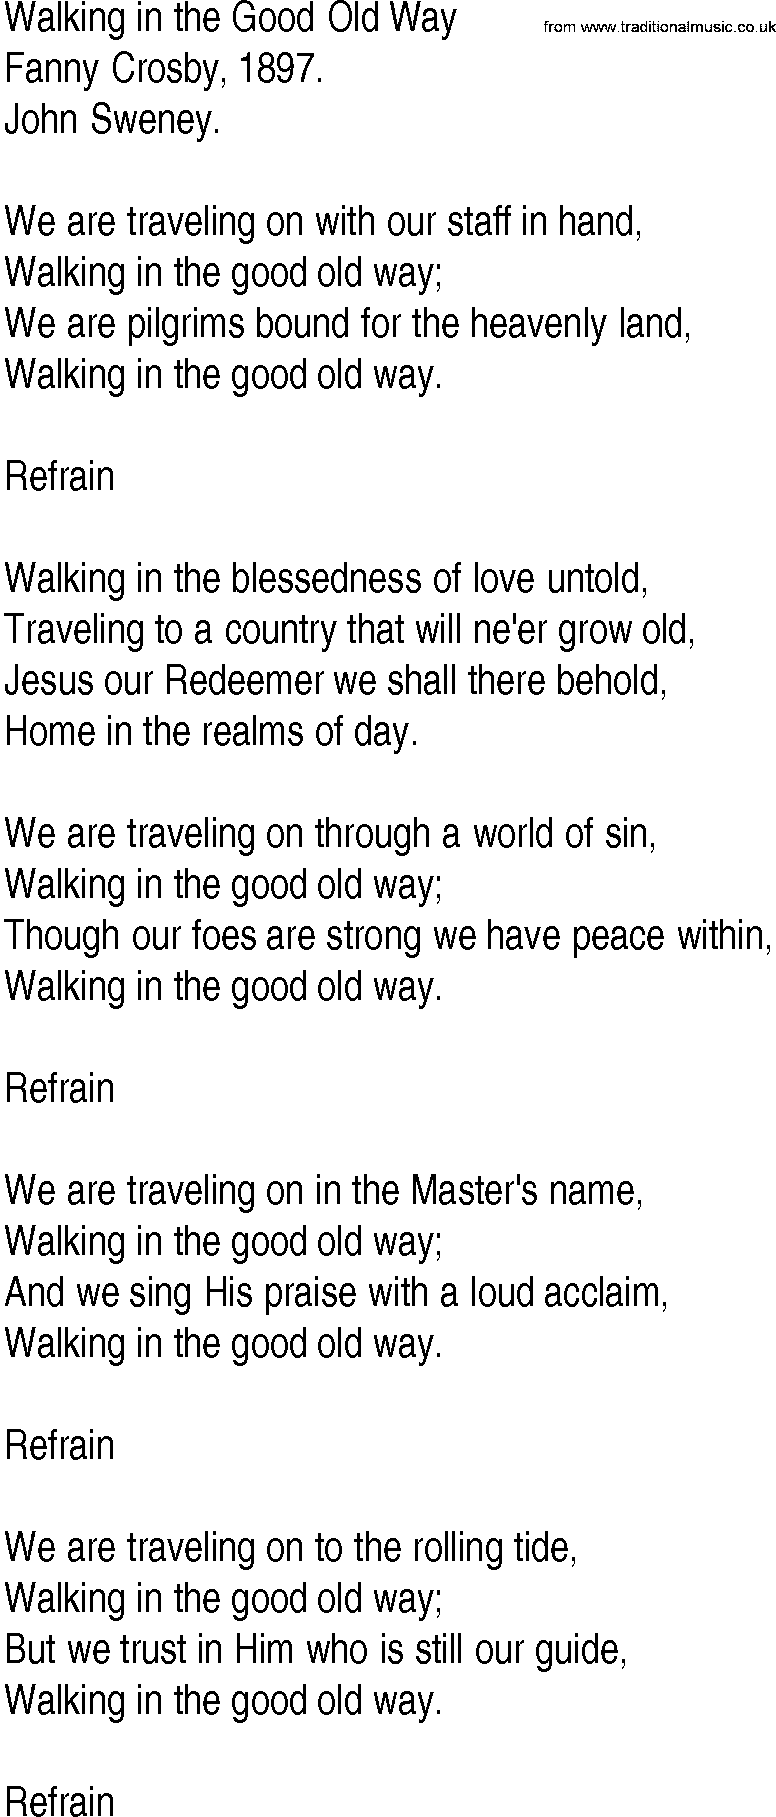 Hymn and Gospel Song: Walking in the Good Old Way by Fanny Crosby lyrics